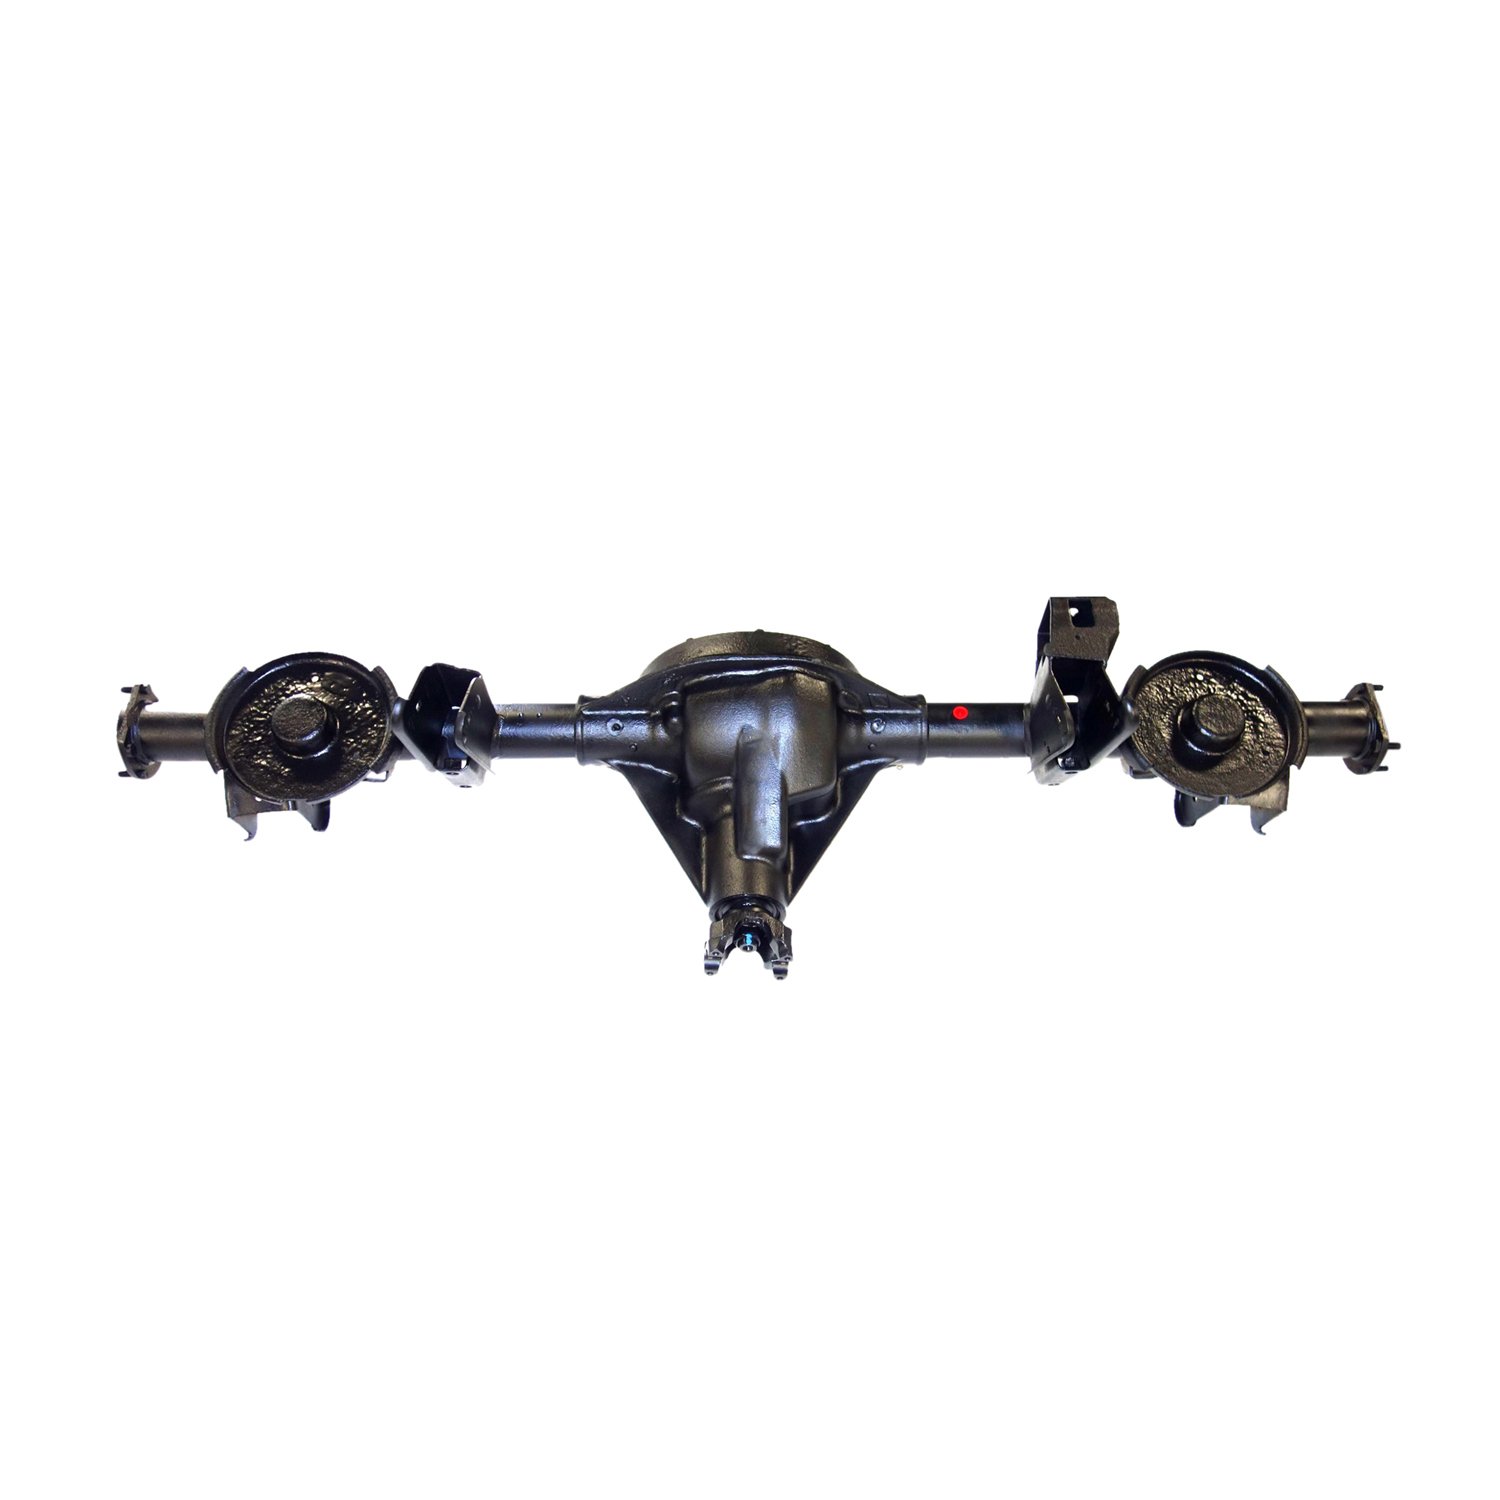 Remanufactured Complete Axle Assembly for Dana 35 97-02 Wrangler 3.07 / w/o ABS, Posi LSD